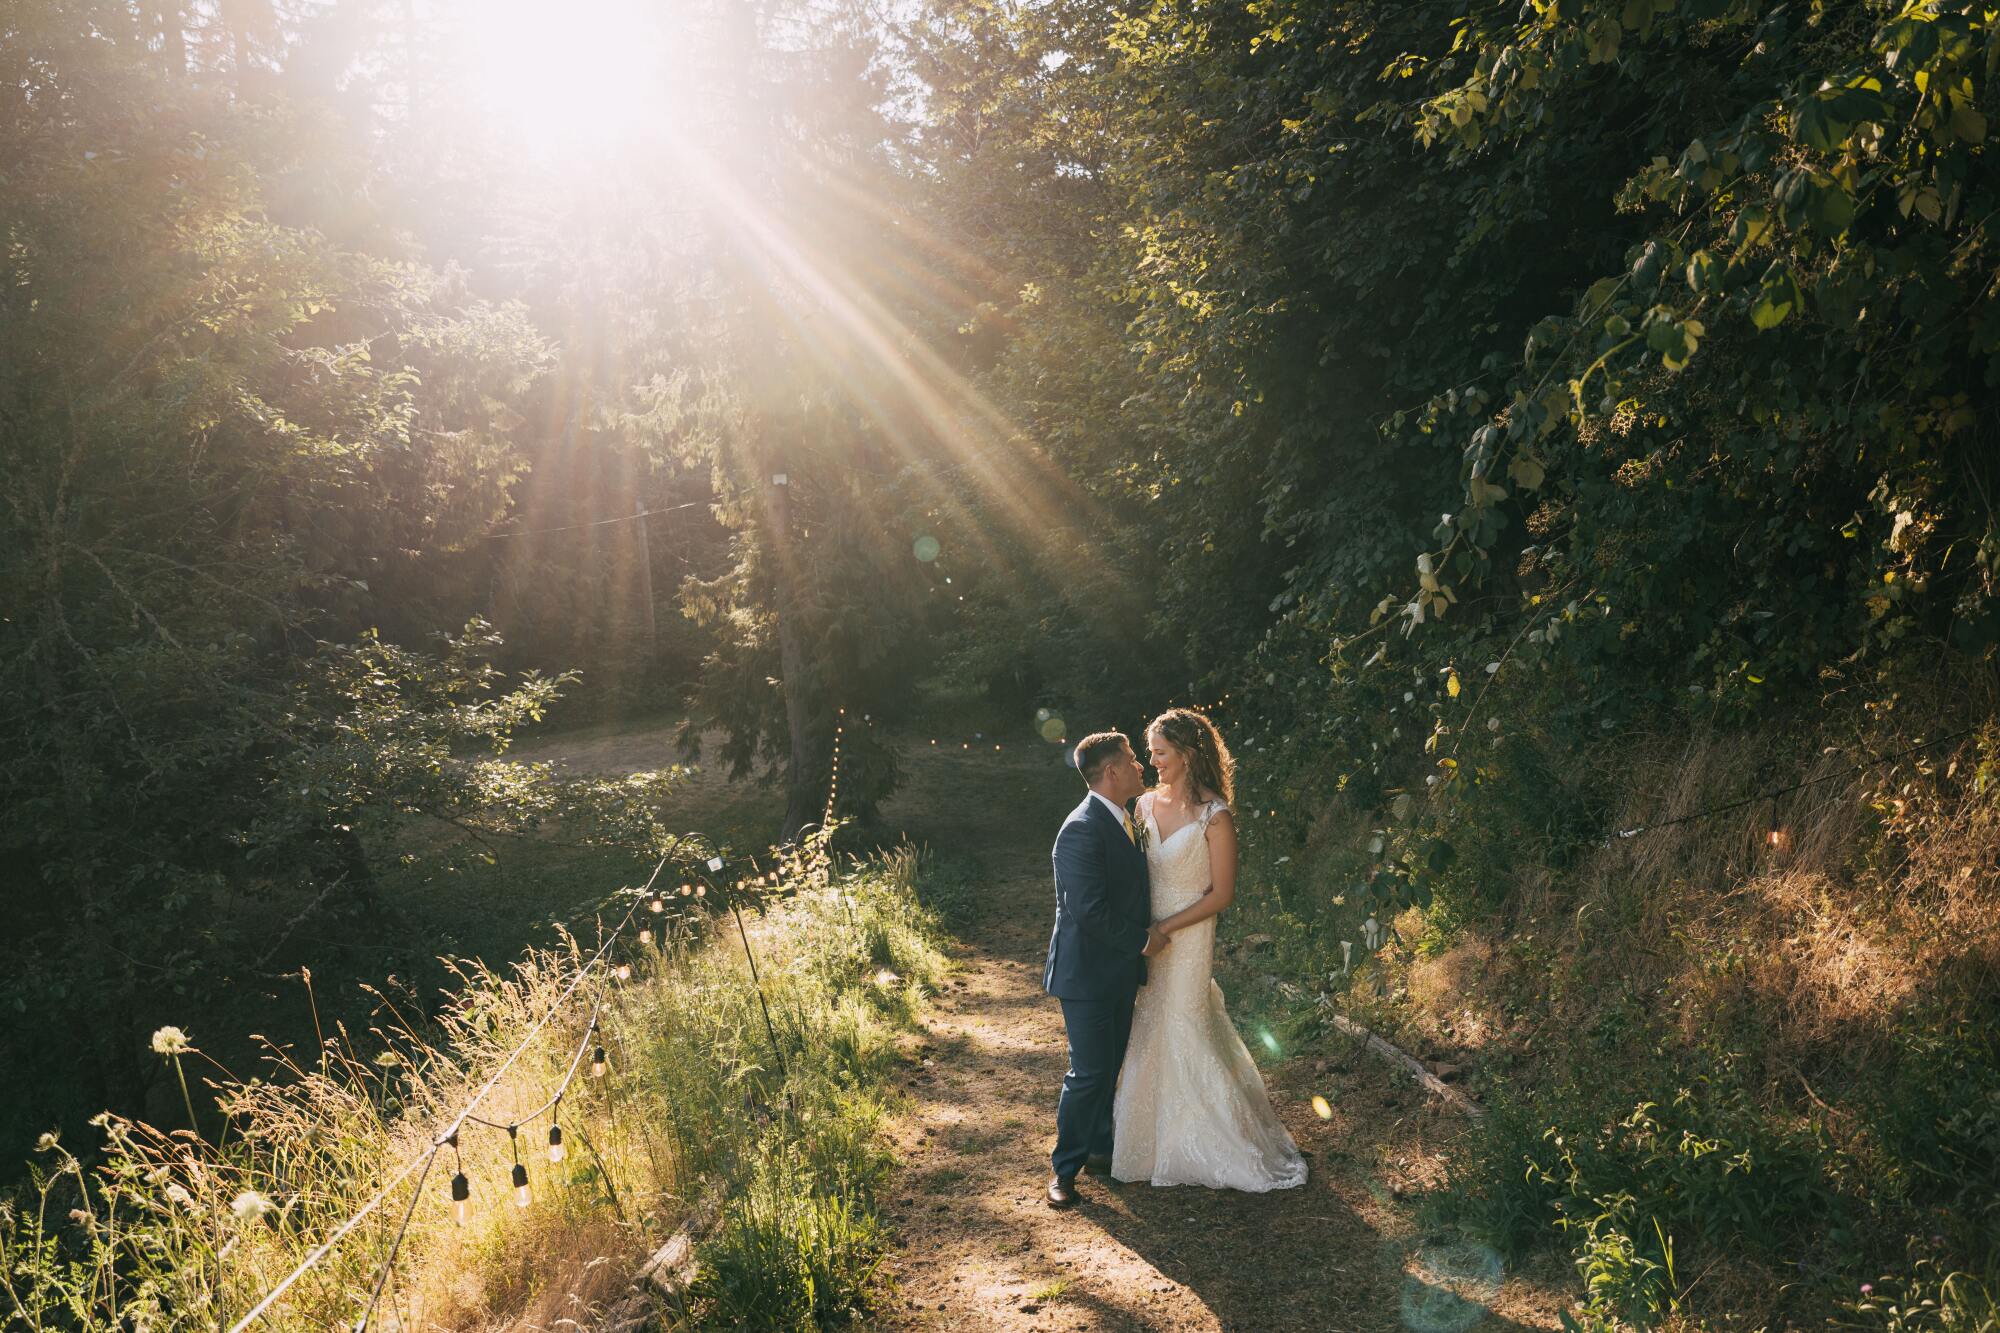 A bride and groom stand outdoors under rays of sunlight